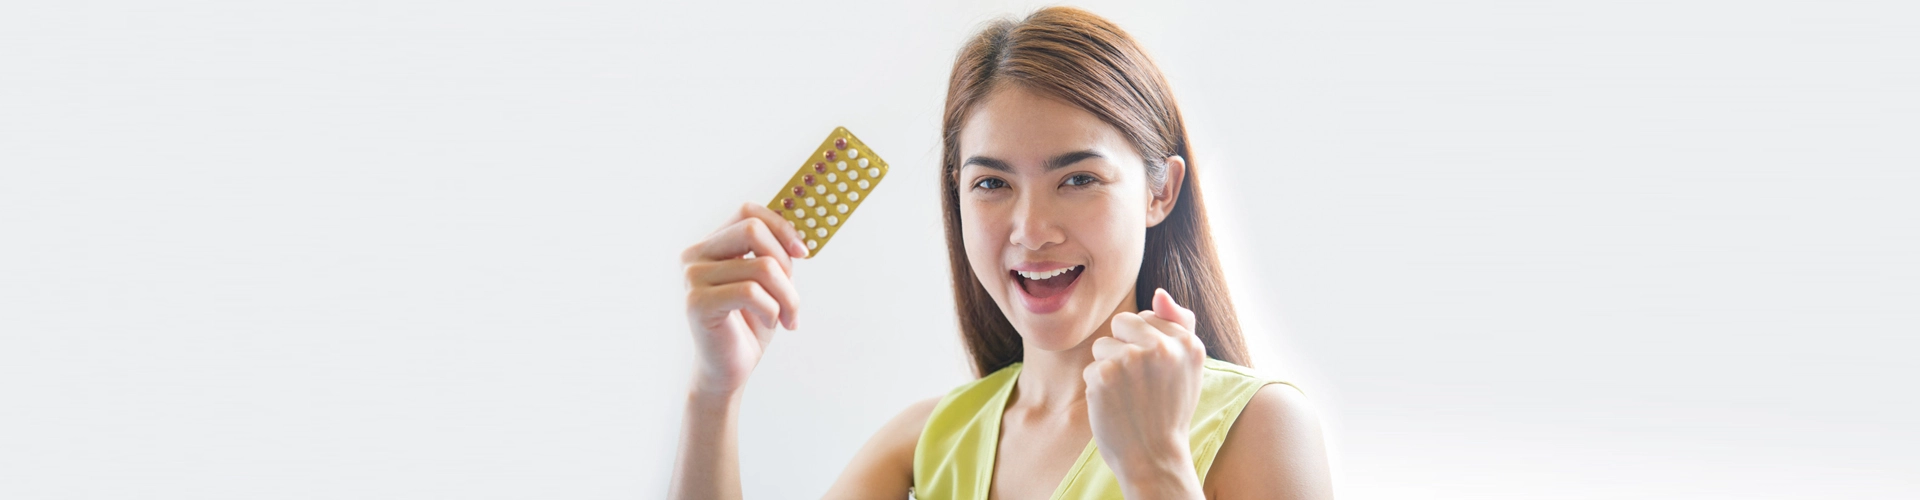 woman holding contraceptive pills